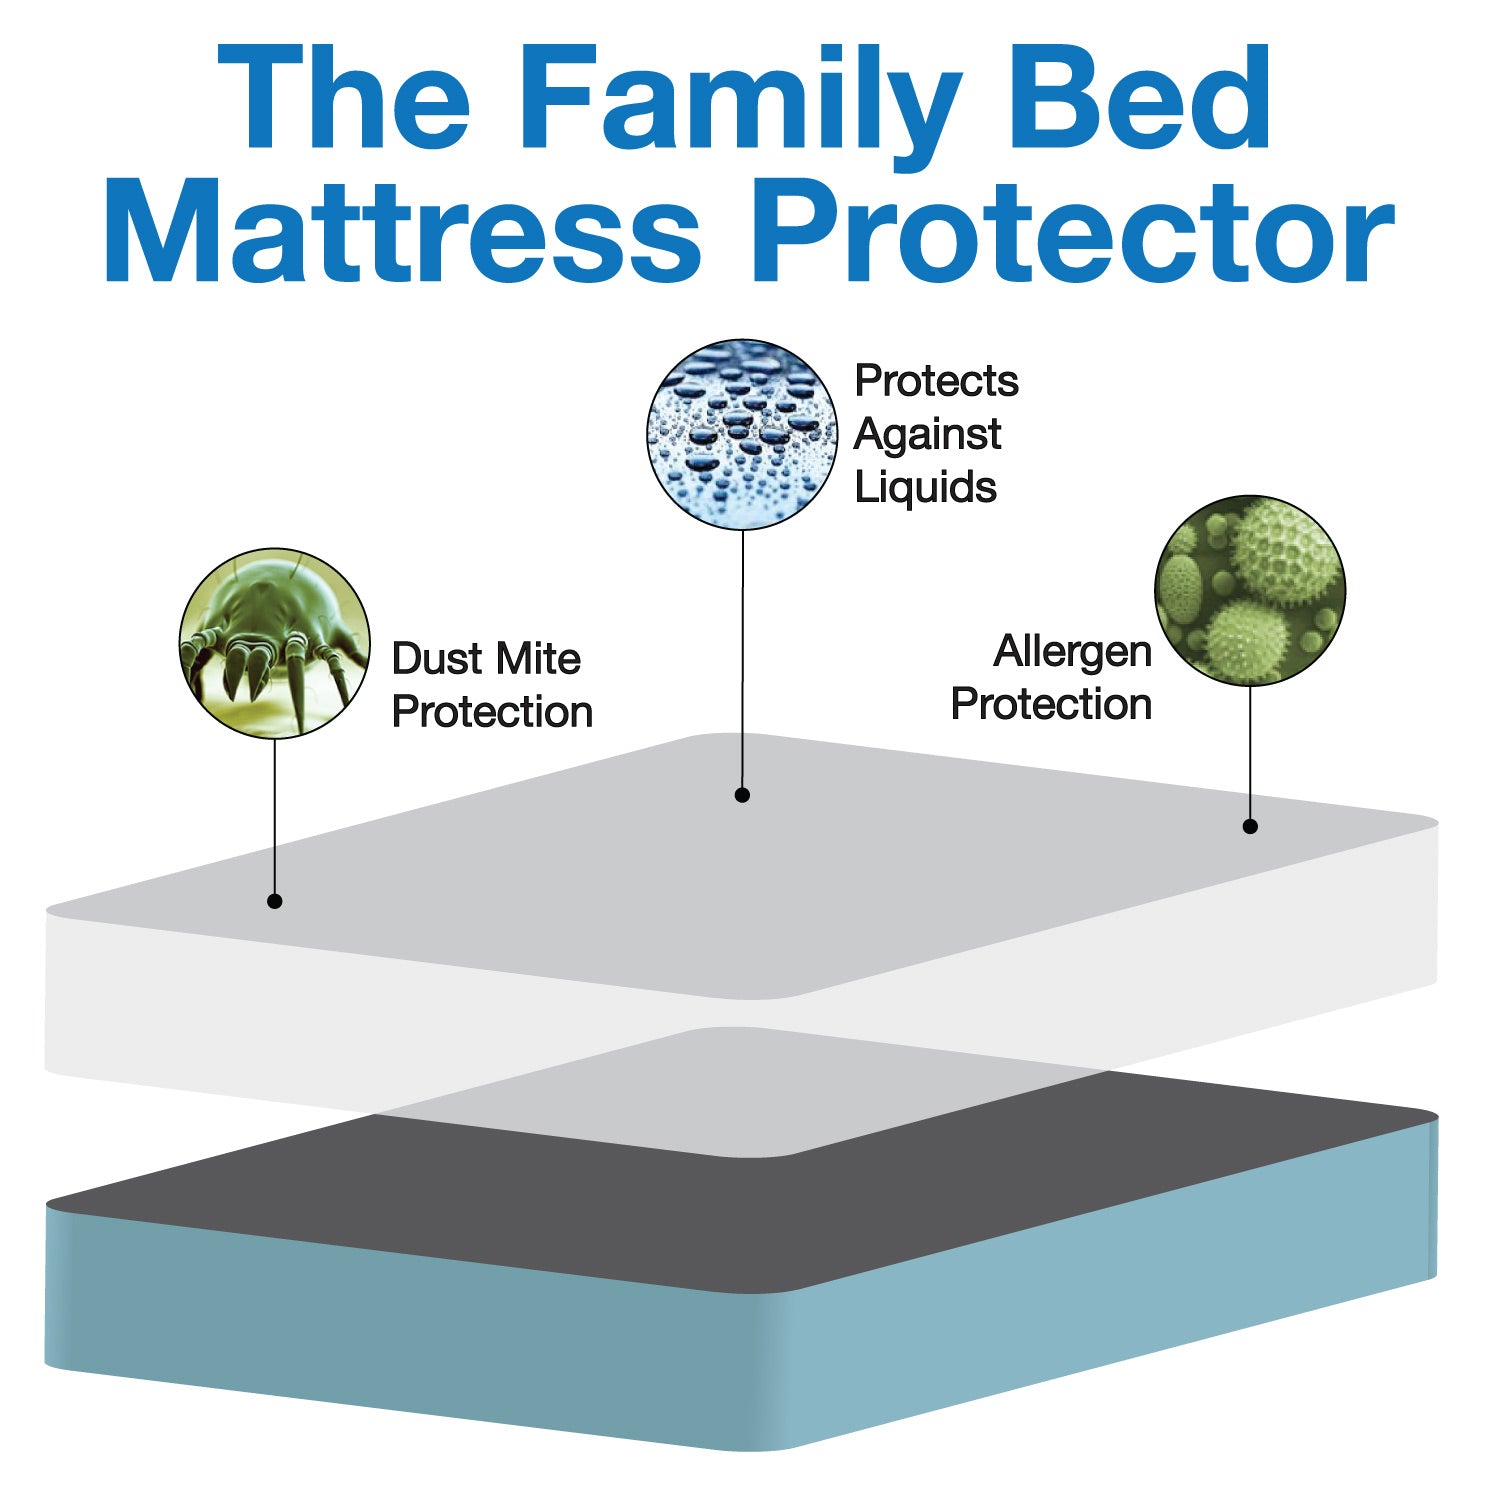 The Family Bed Mattress Protector